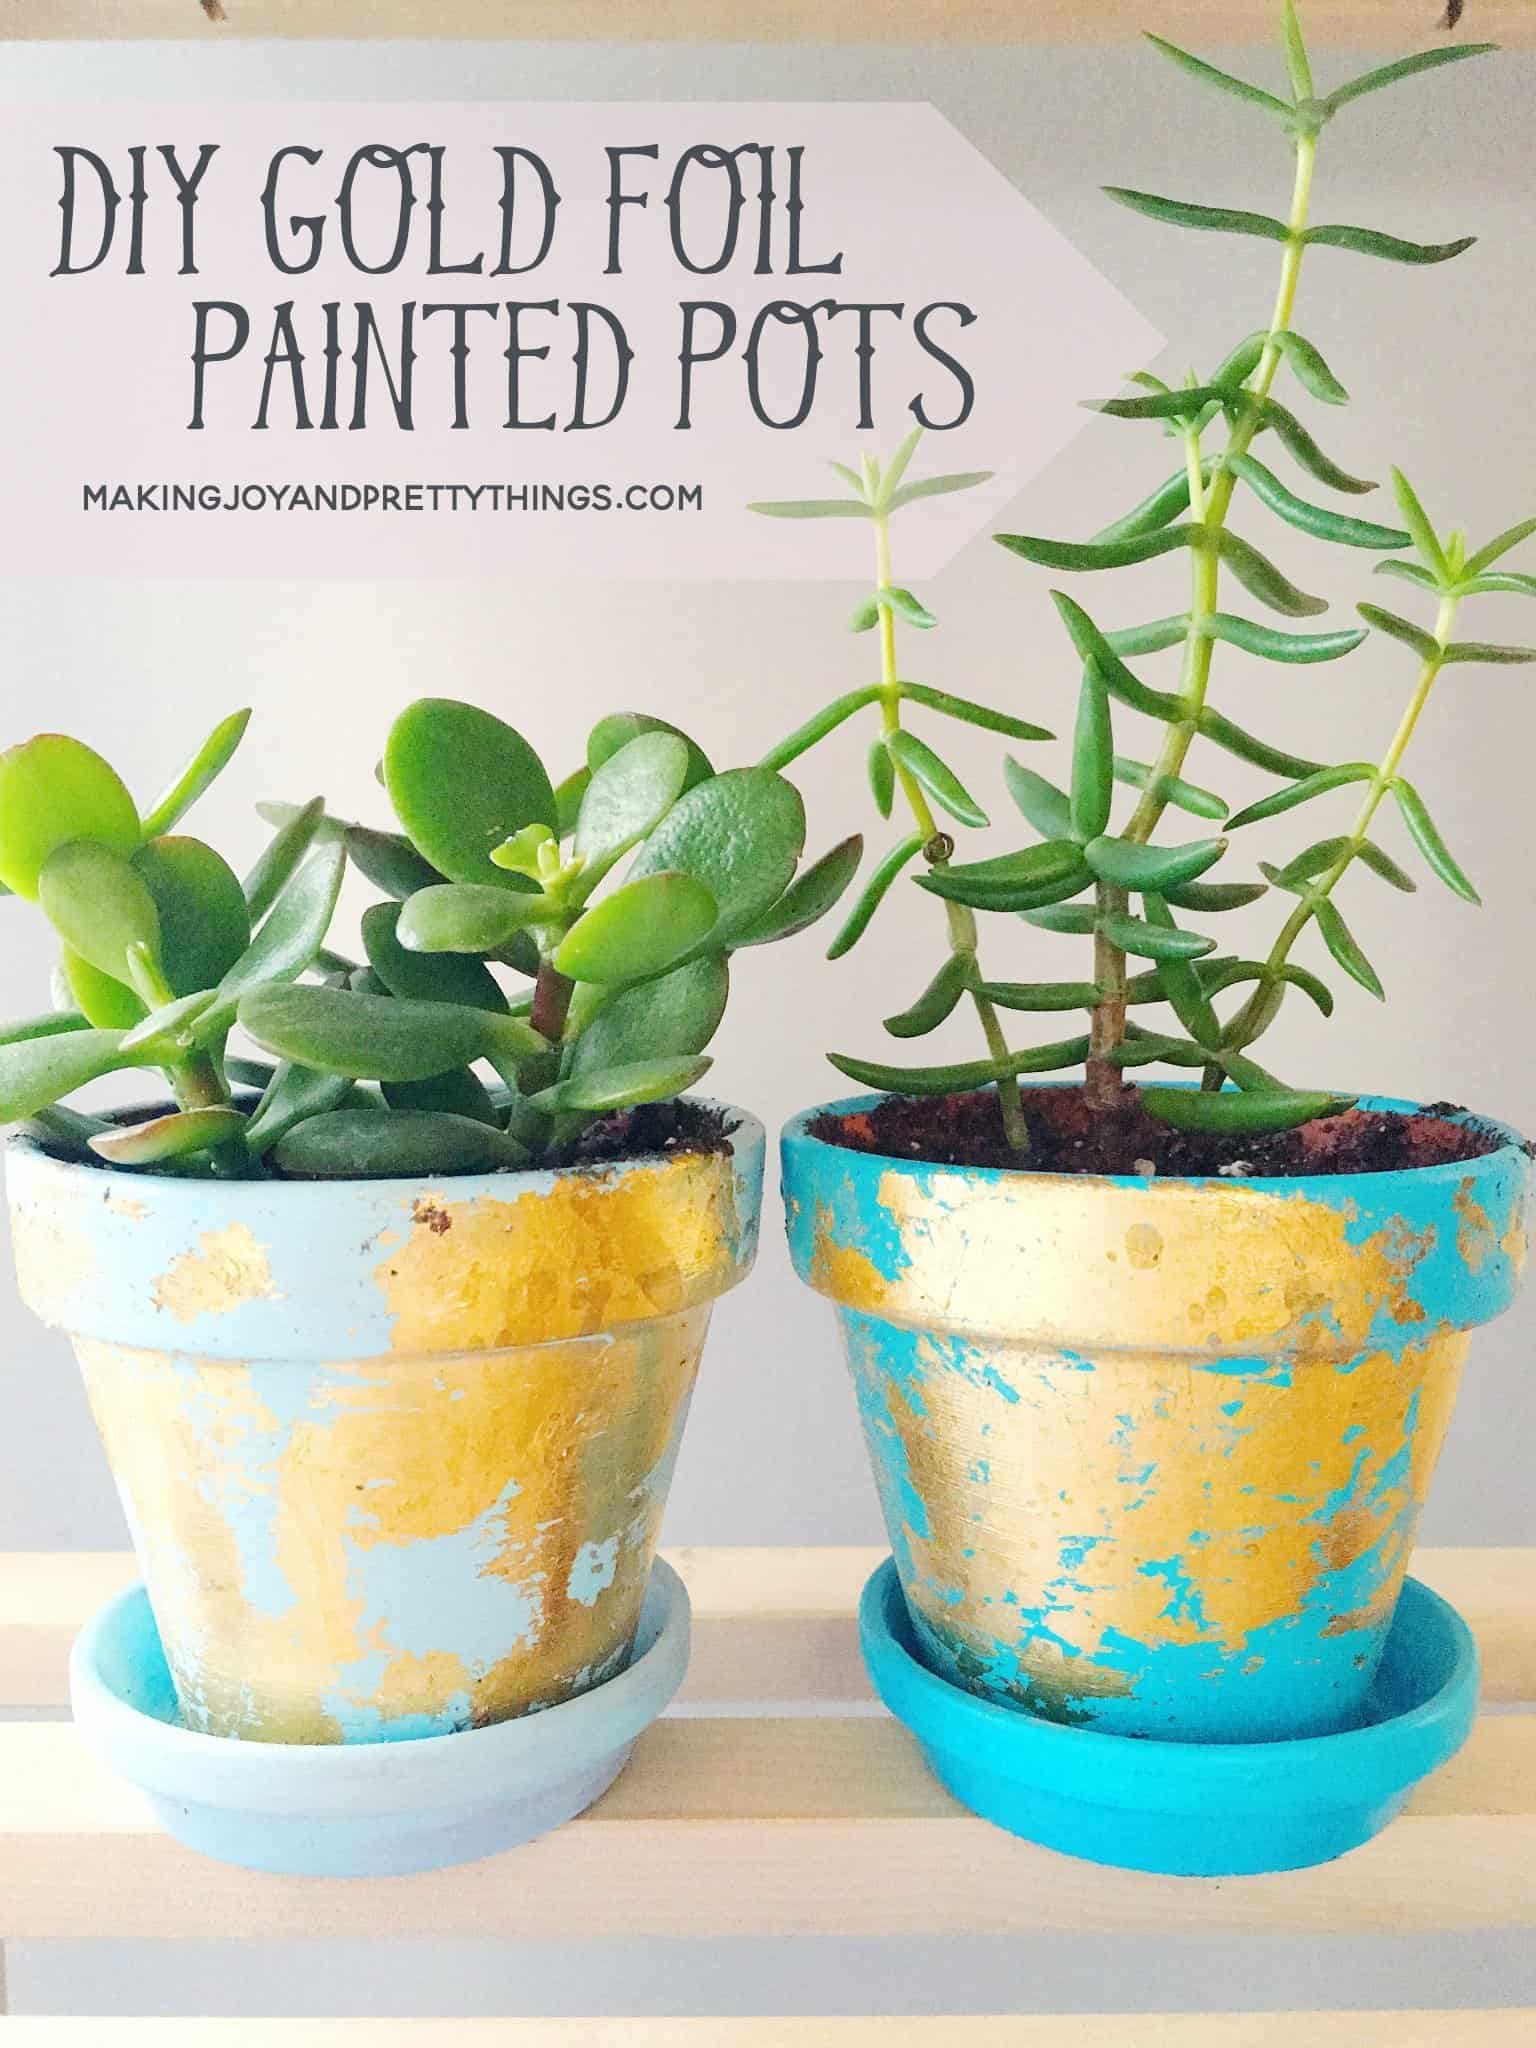 DIY Gold leaf planters make a great diy project to do in a matter of hours that provides spaces for greenery in your home